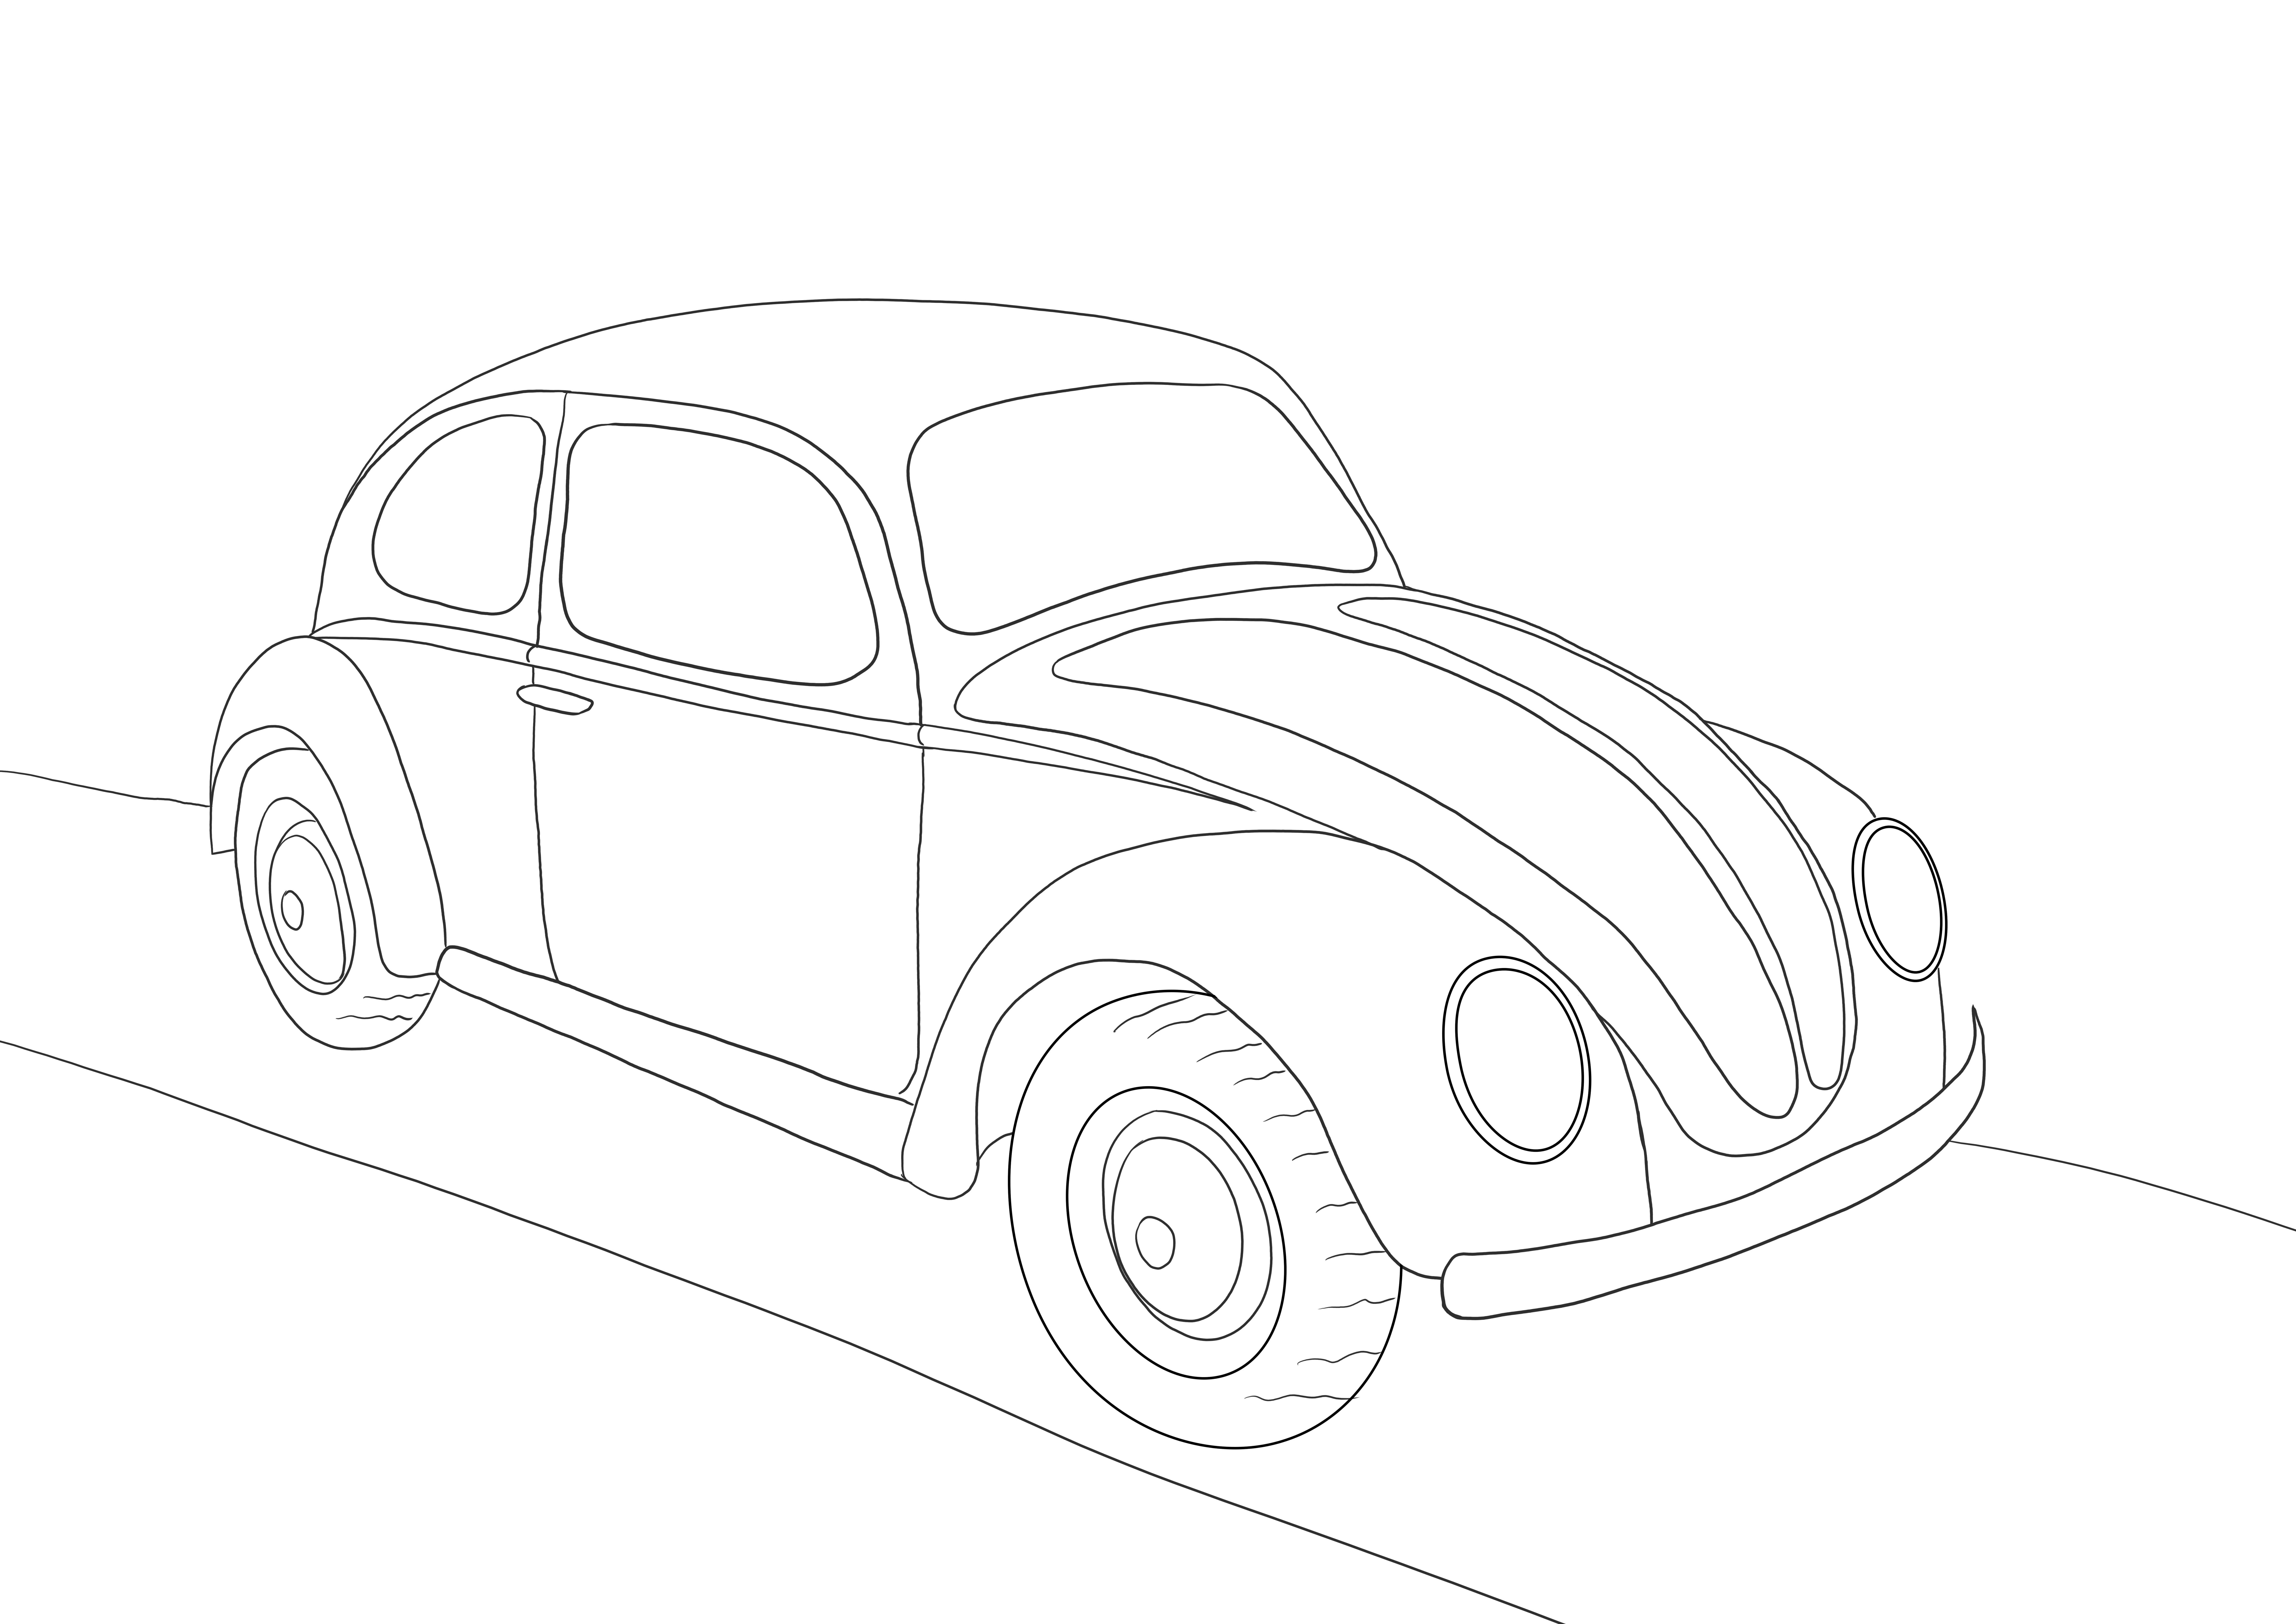 Volkswagen Beetle free printable for coloring or saving for later picture